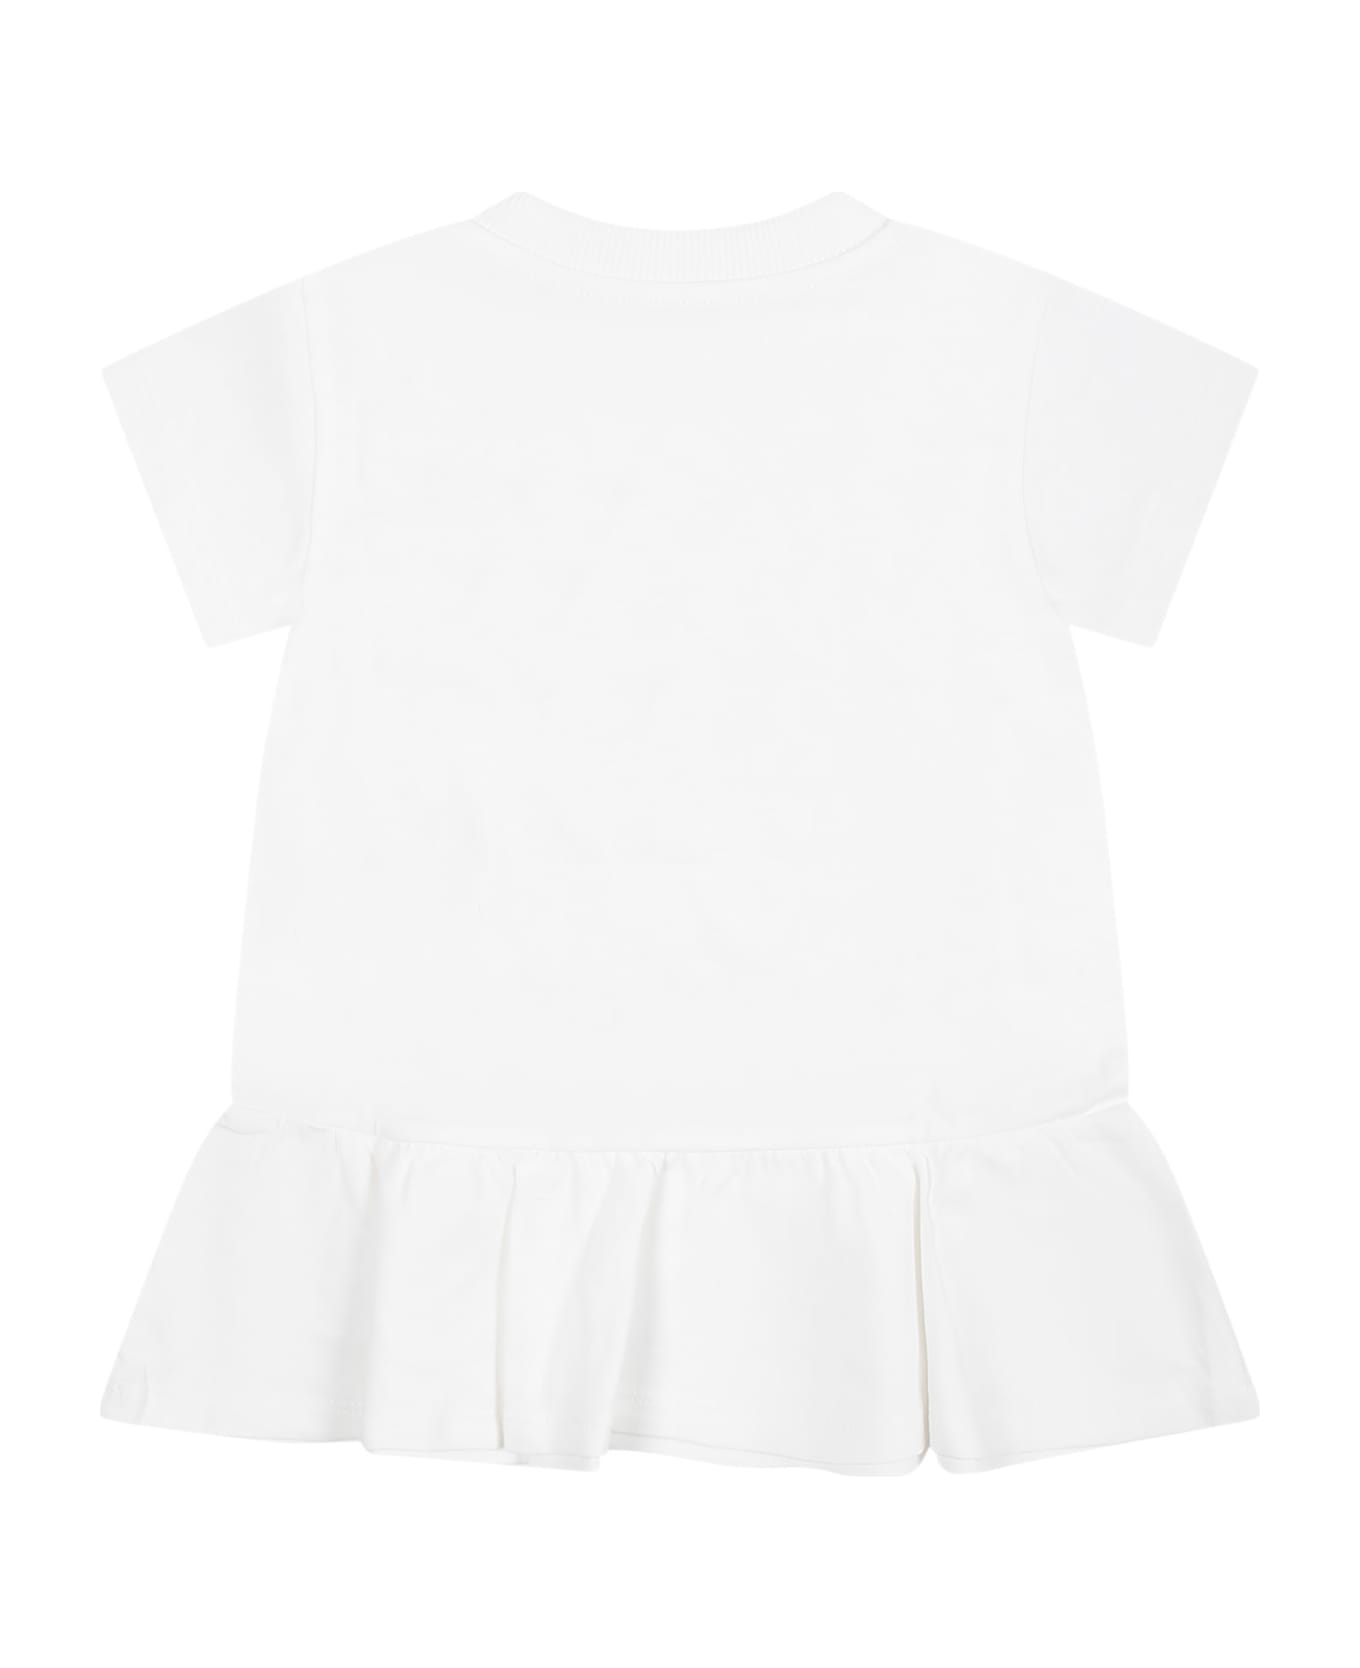 Moschino White Dress For Baby Girl With Logo And Animals - White